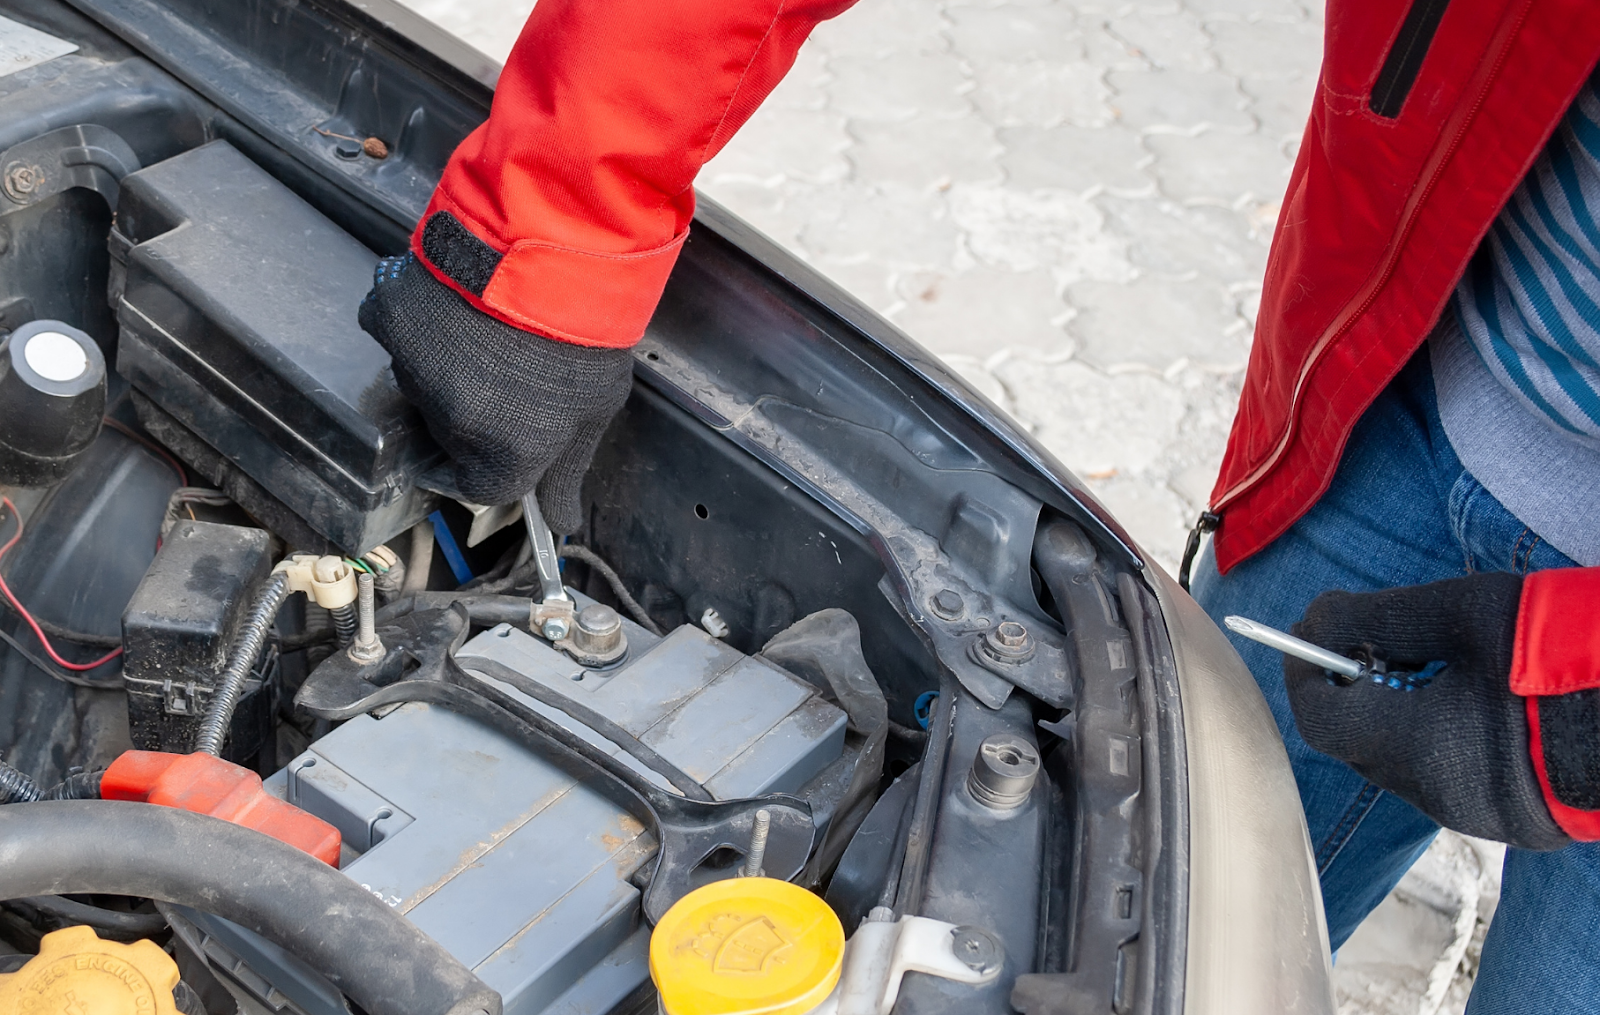 How Do I Keep My Car's Battery Healthy While in Storage